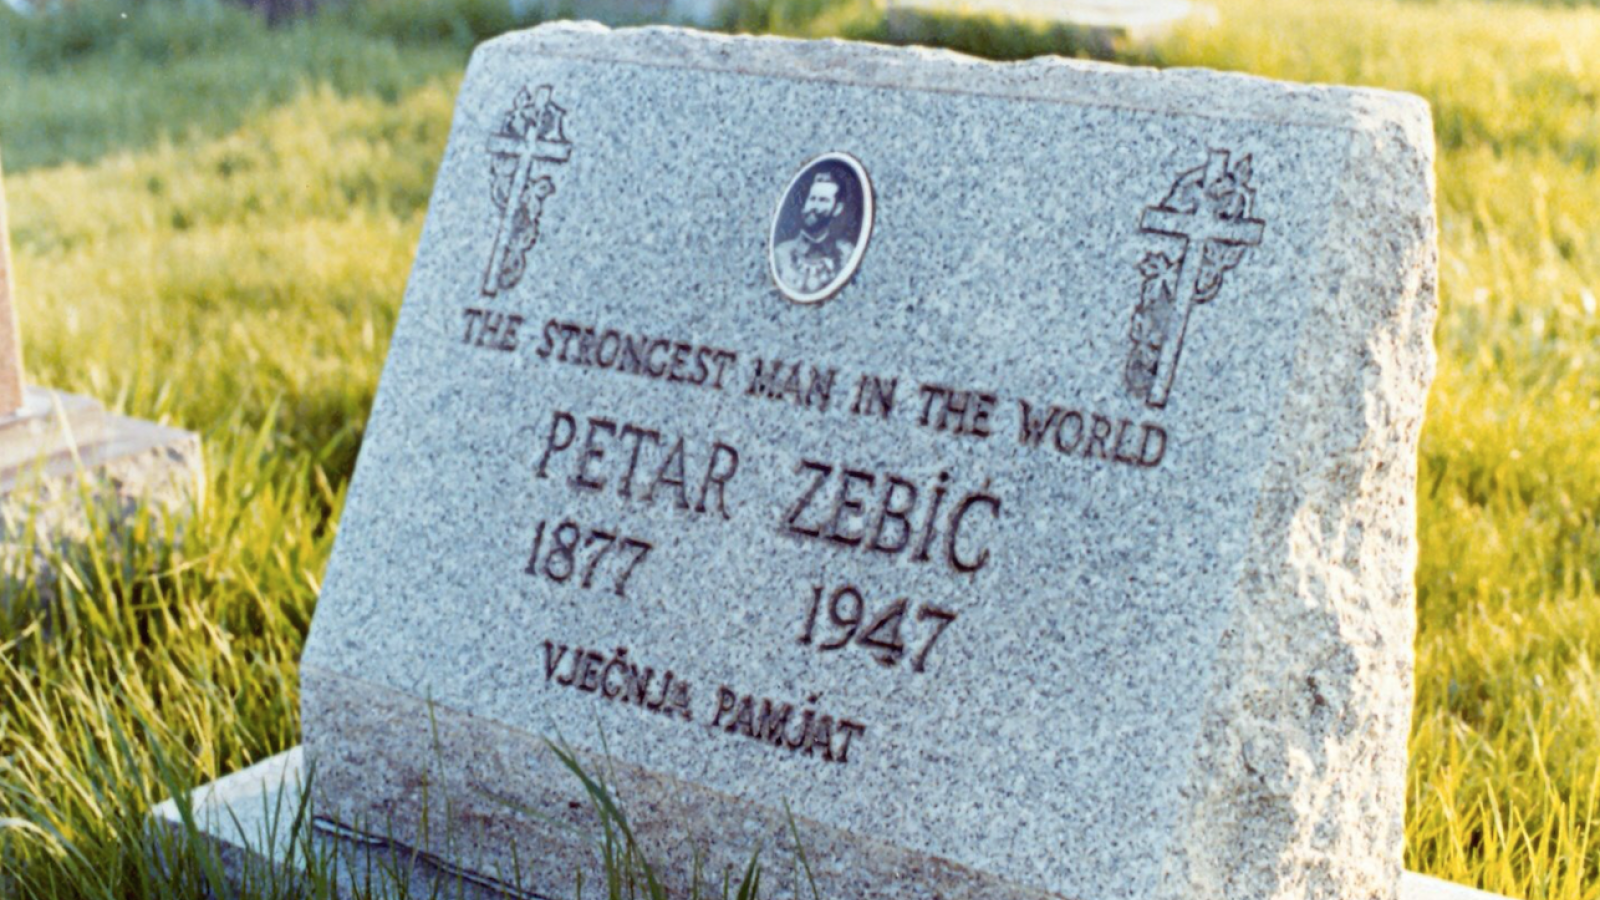 Petar Zebic's tombstone at St. Theodosius Cemetary, Cleveland, 1979.